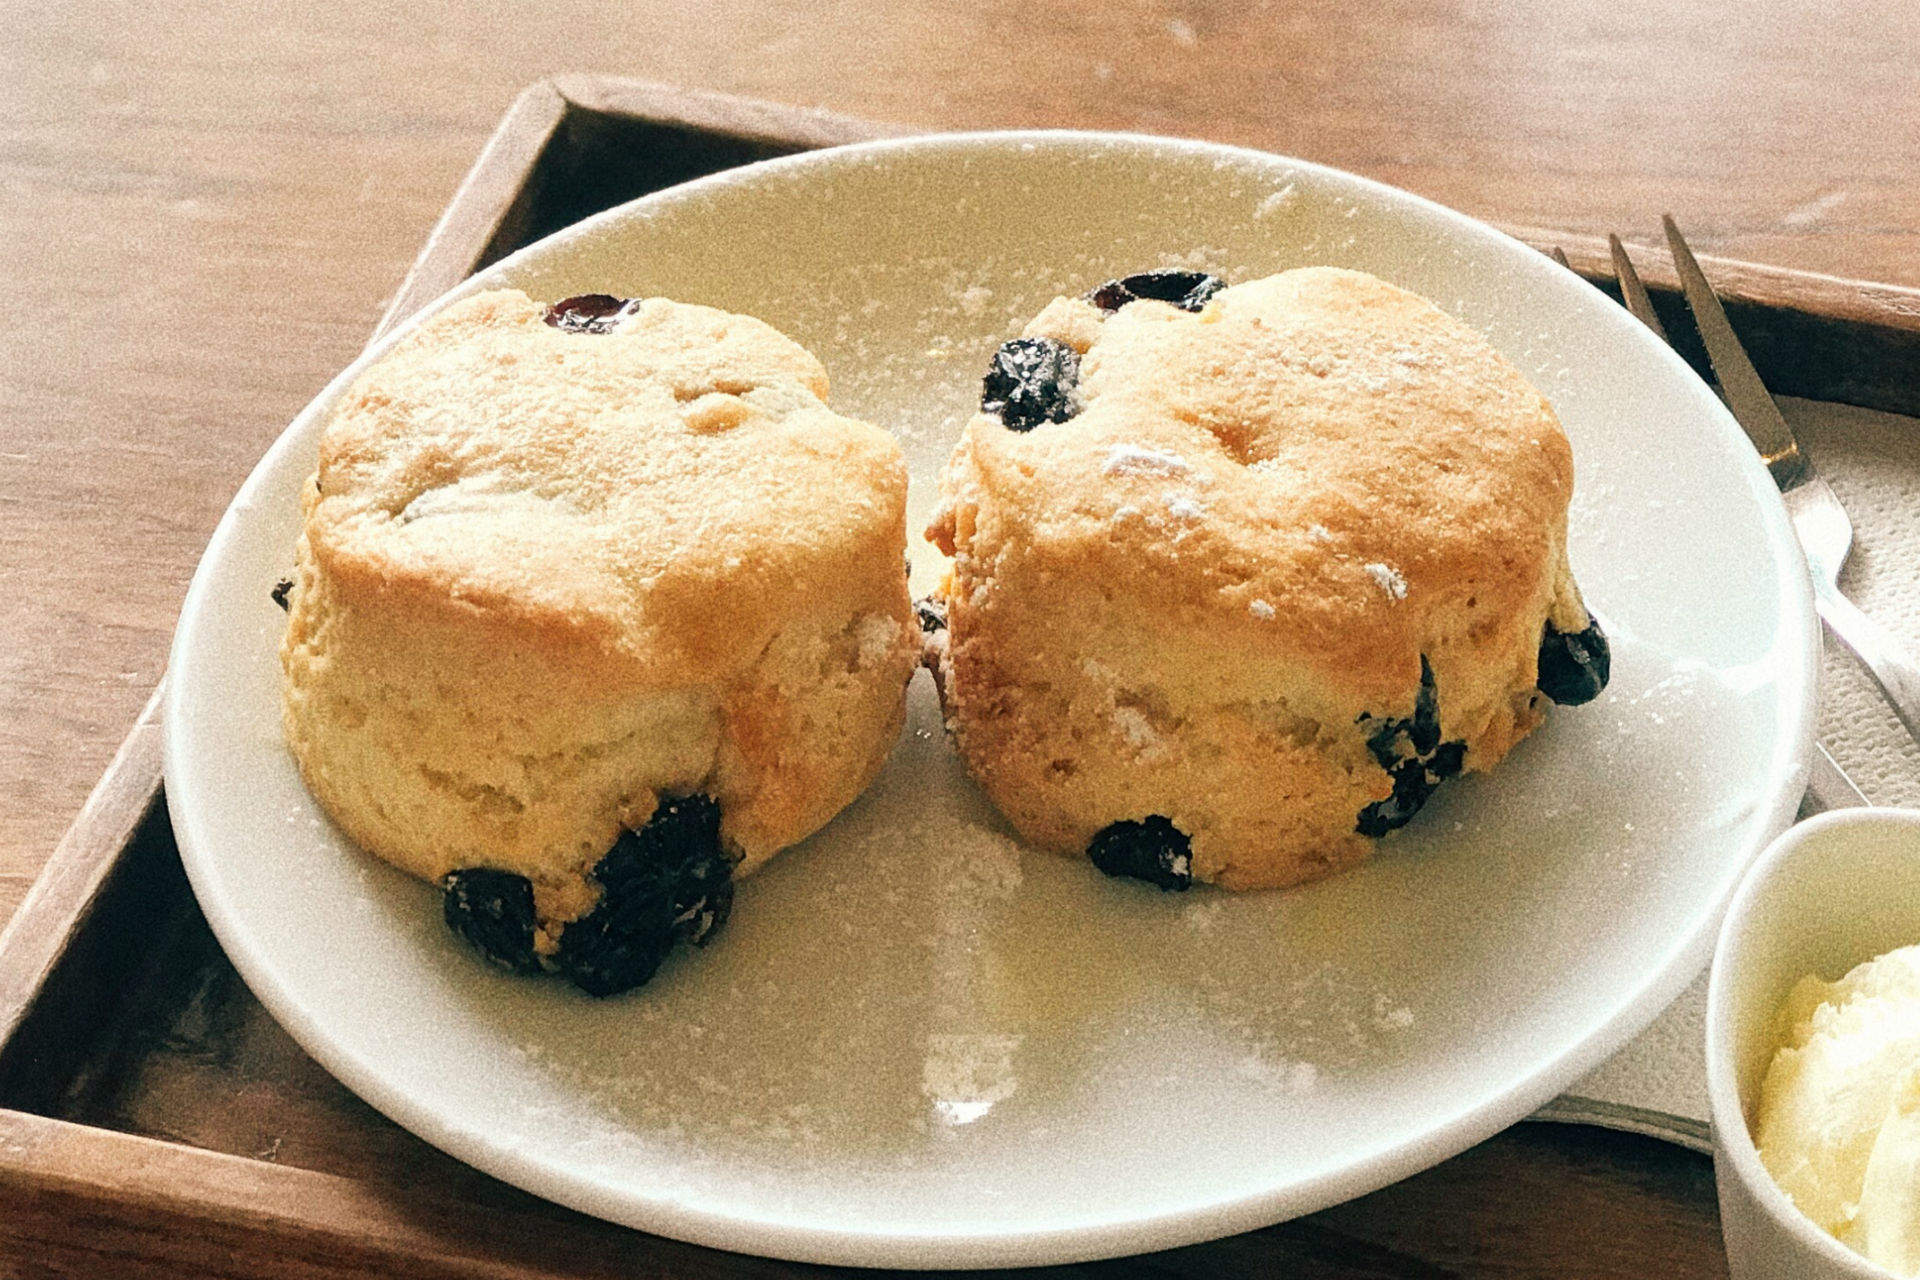 biscuits with berries